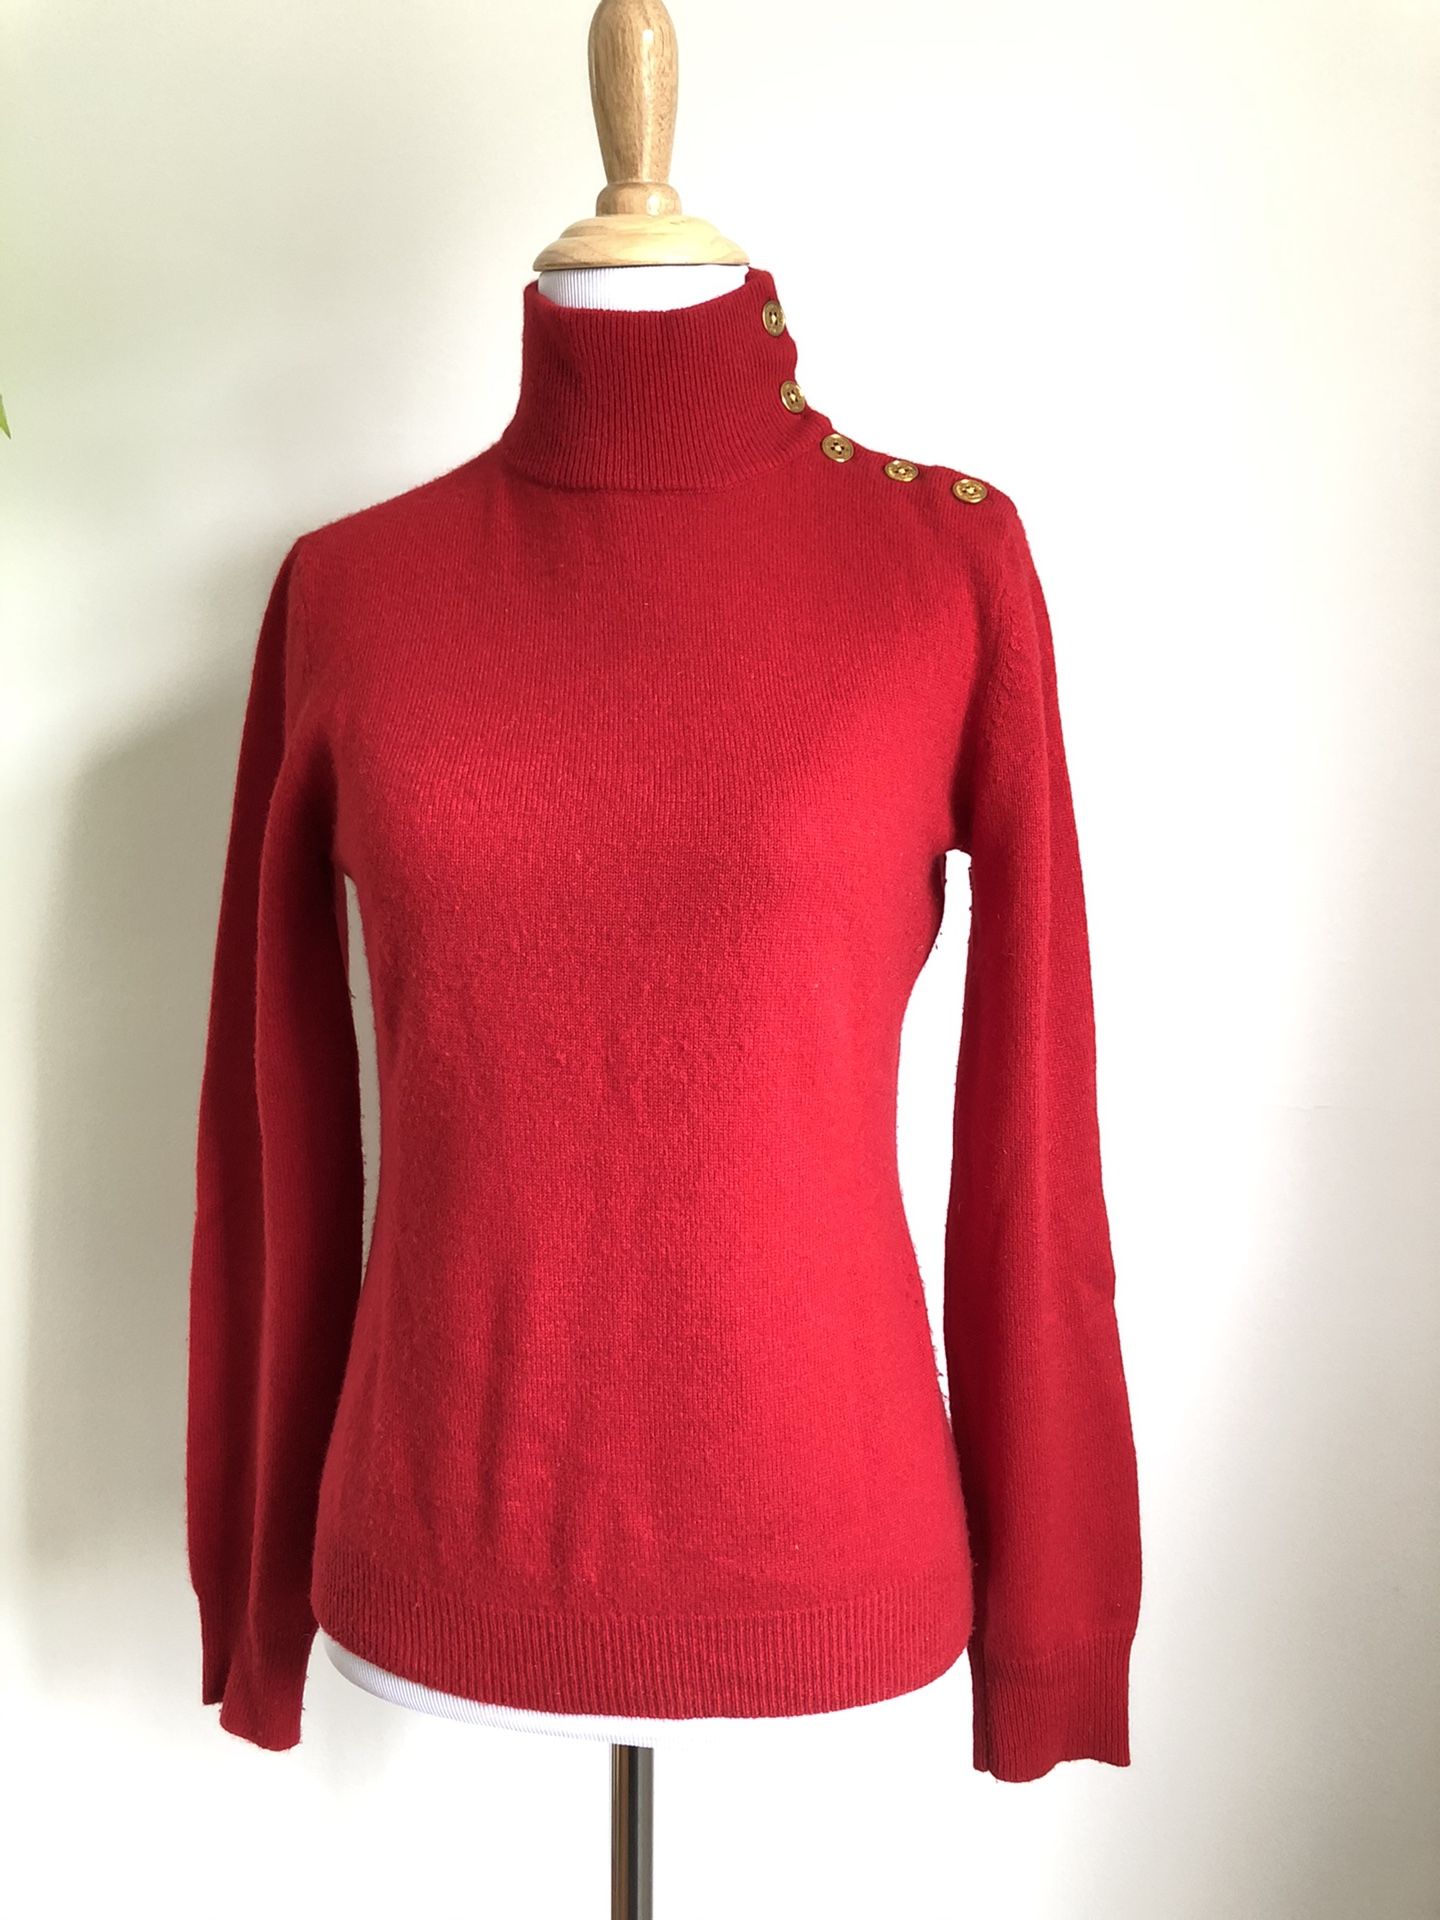 Lauren by Ralph Lauren - Red 100% Cashmere Sweater - Size XS Extra Small